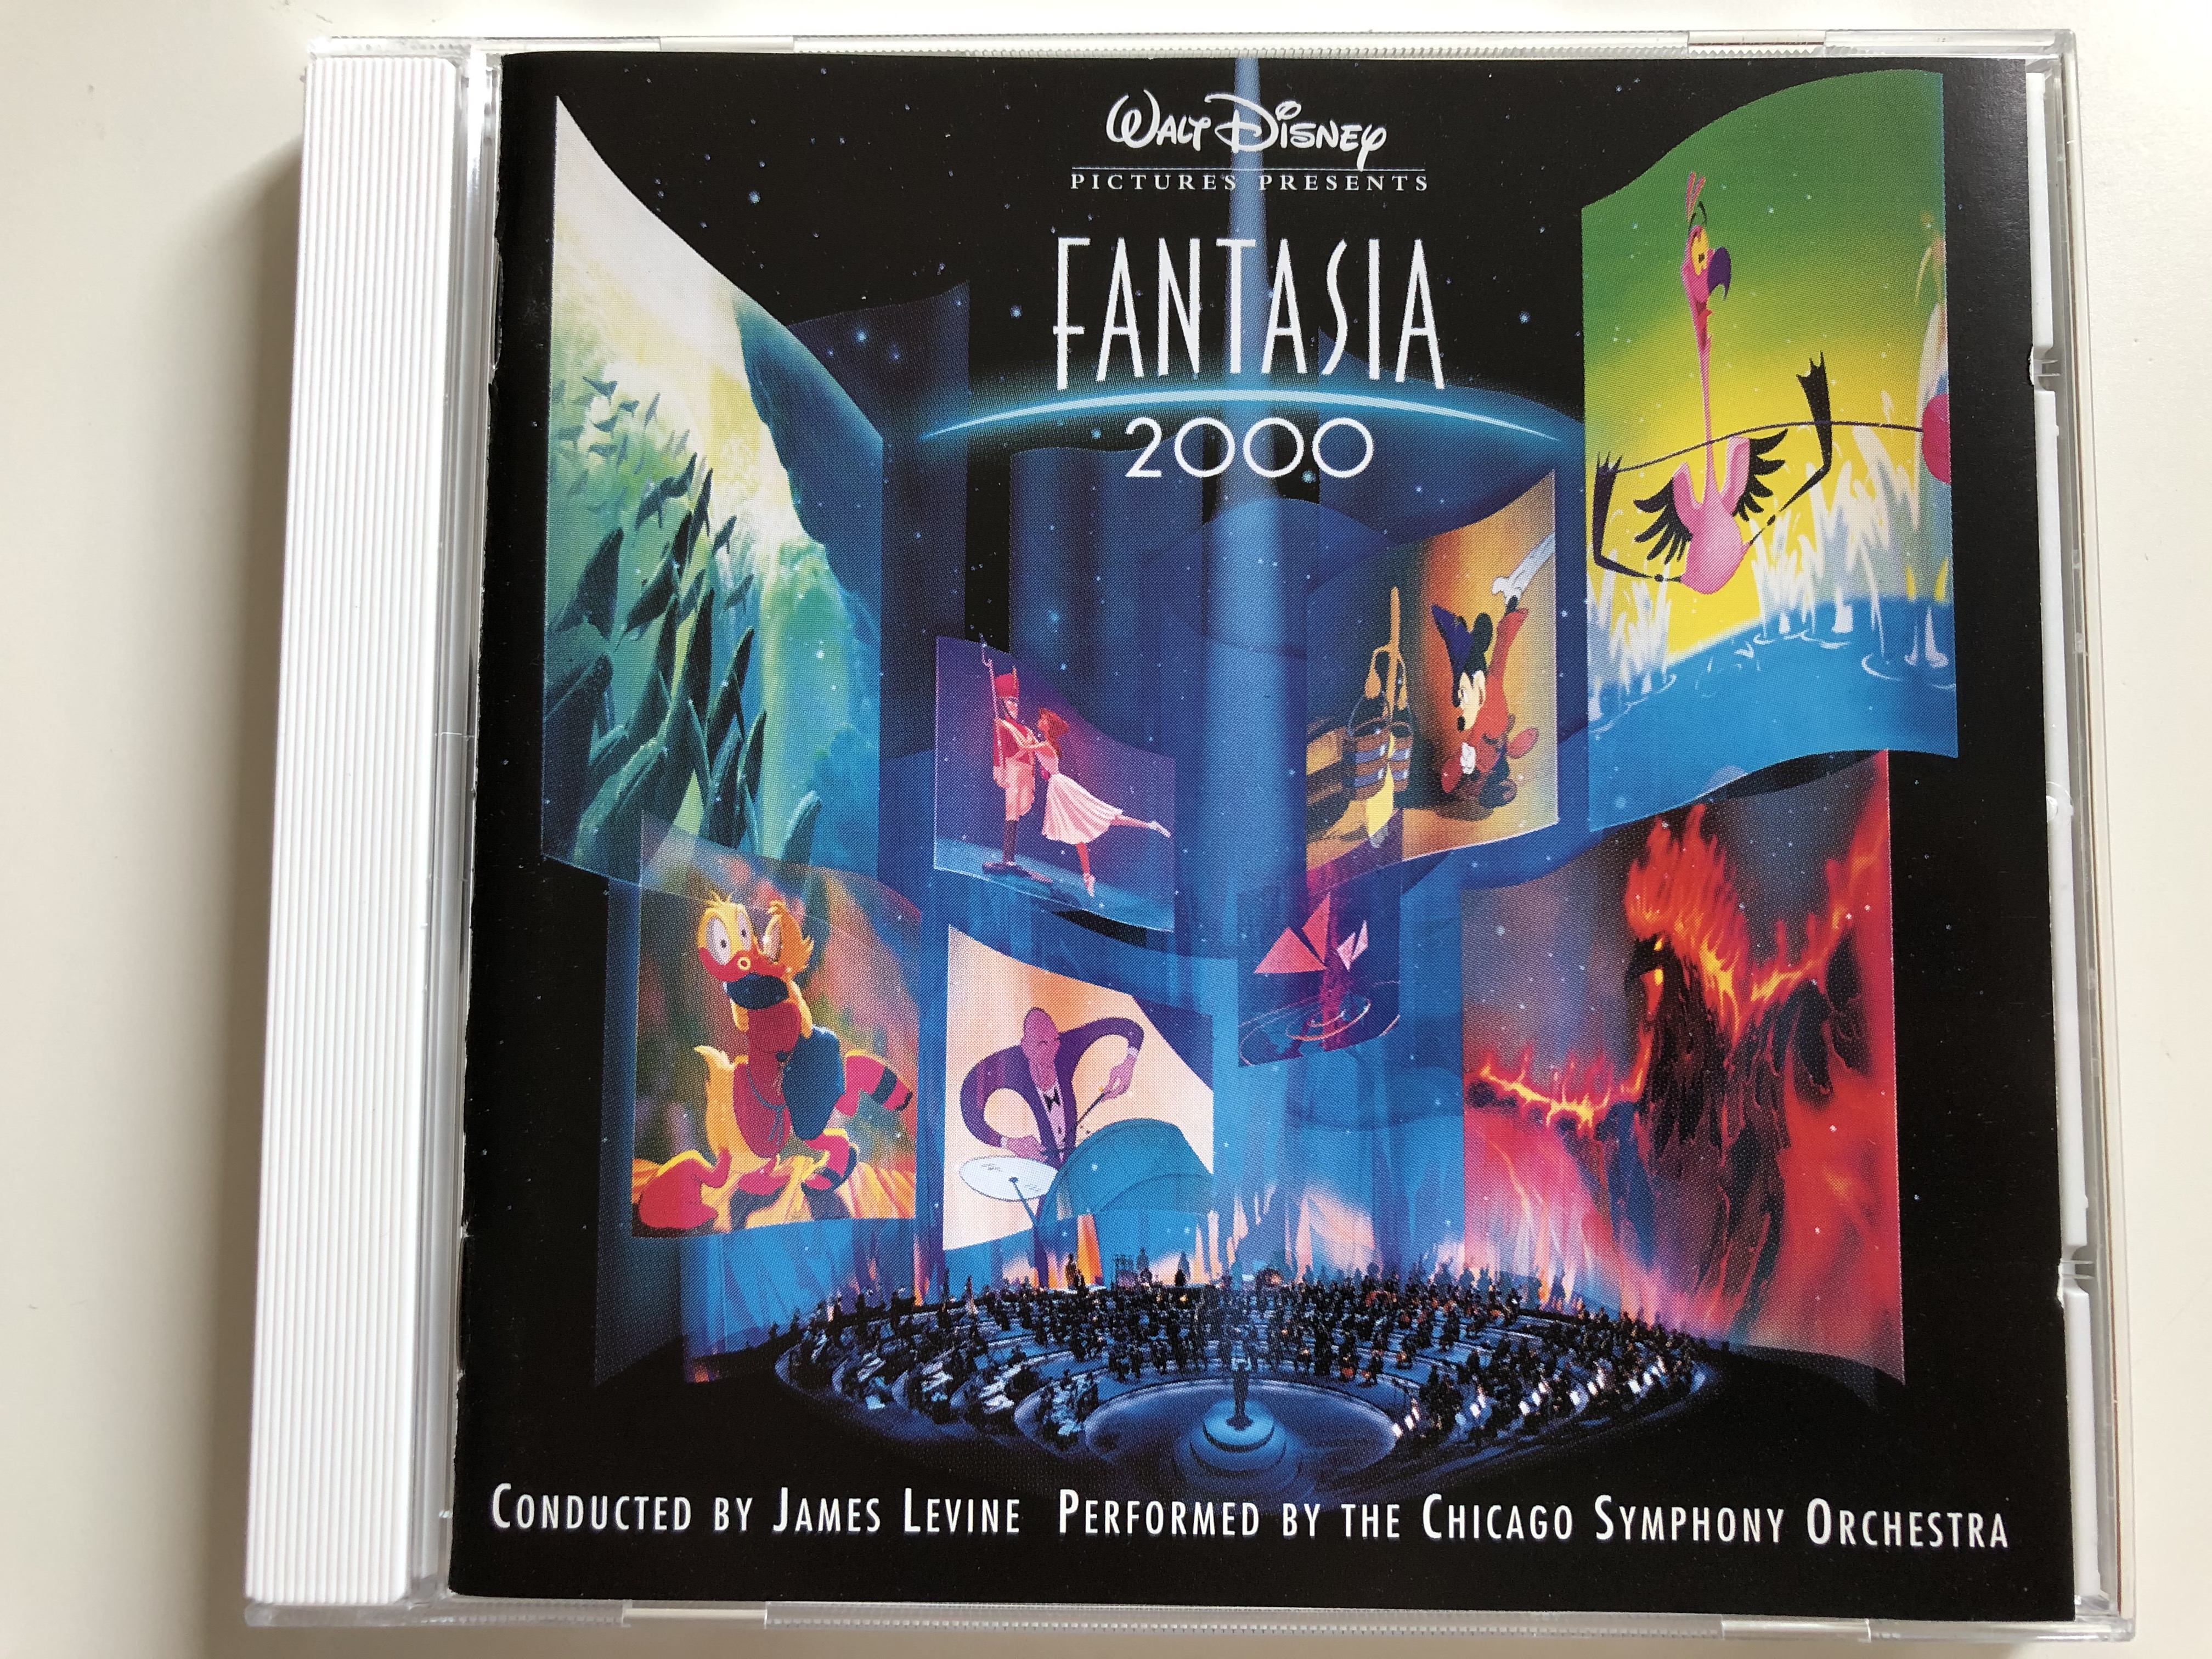 fantasia-2000-conducted-james-levine-the-chicago-symphony-orchestra-walt-disney-records-audio-cd-1999-sk-65995-1-.jpg